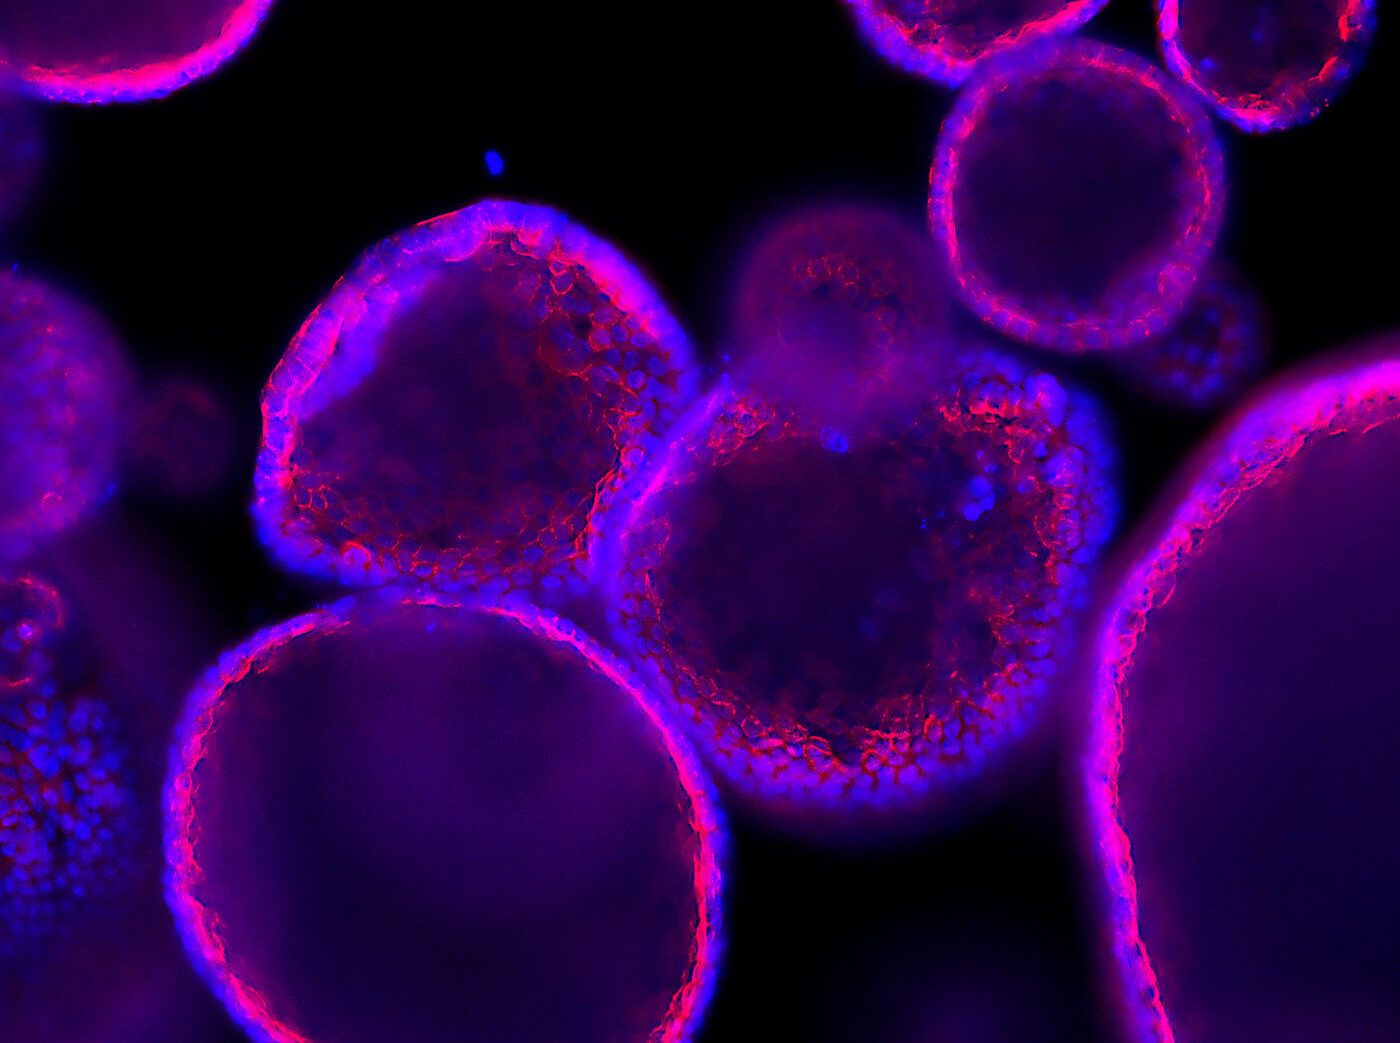 Organoids Evolve from Academic Marvel to Industrial Tool